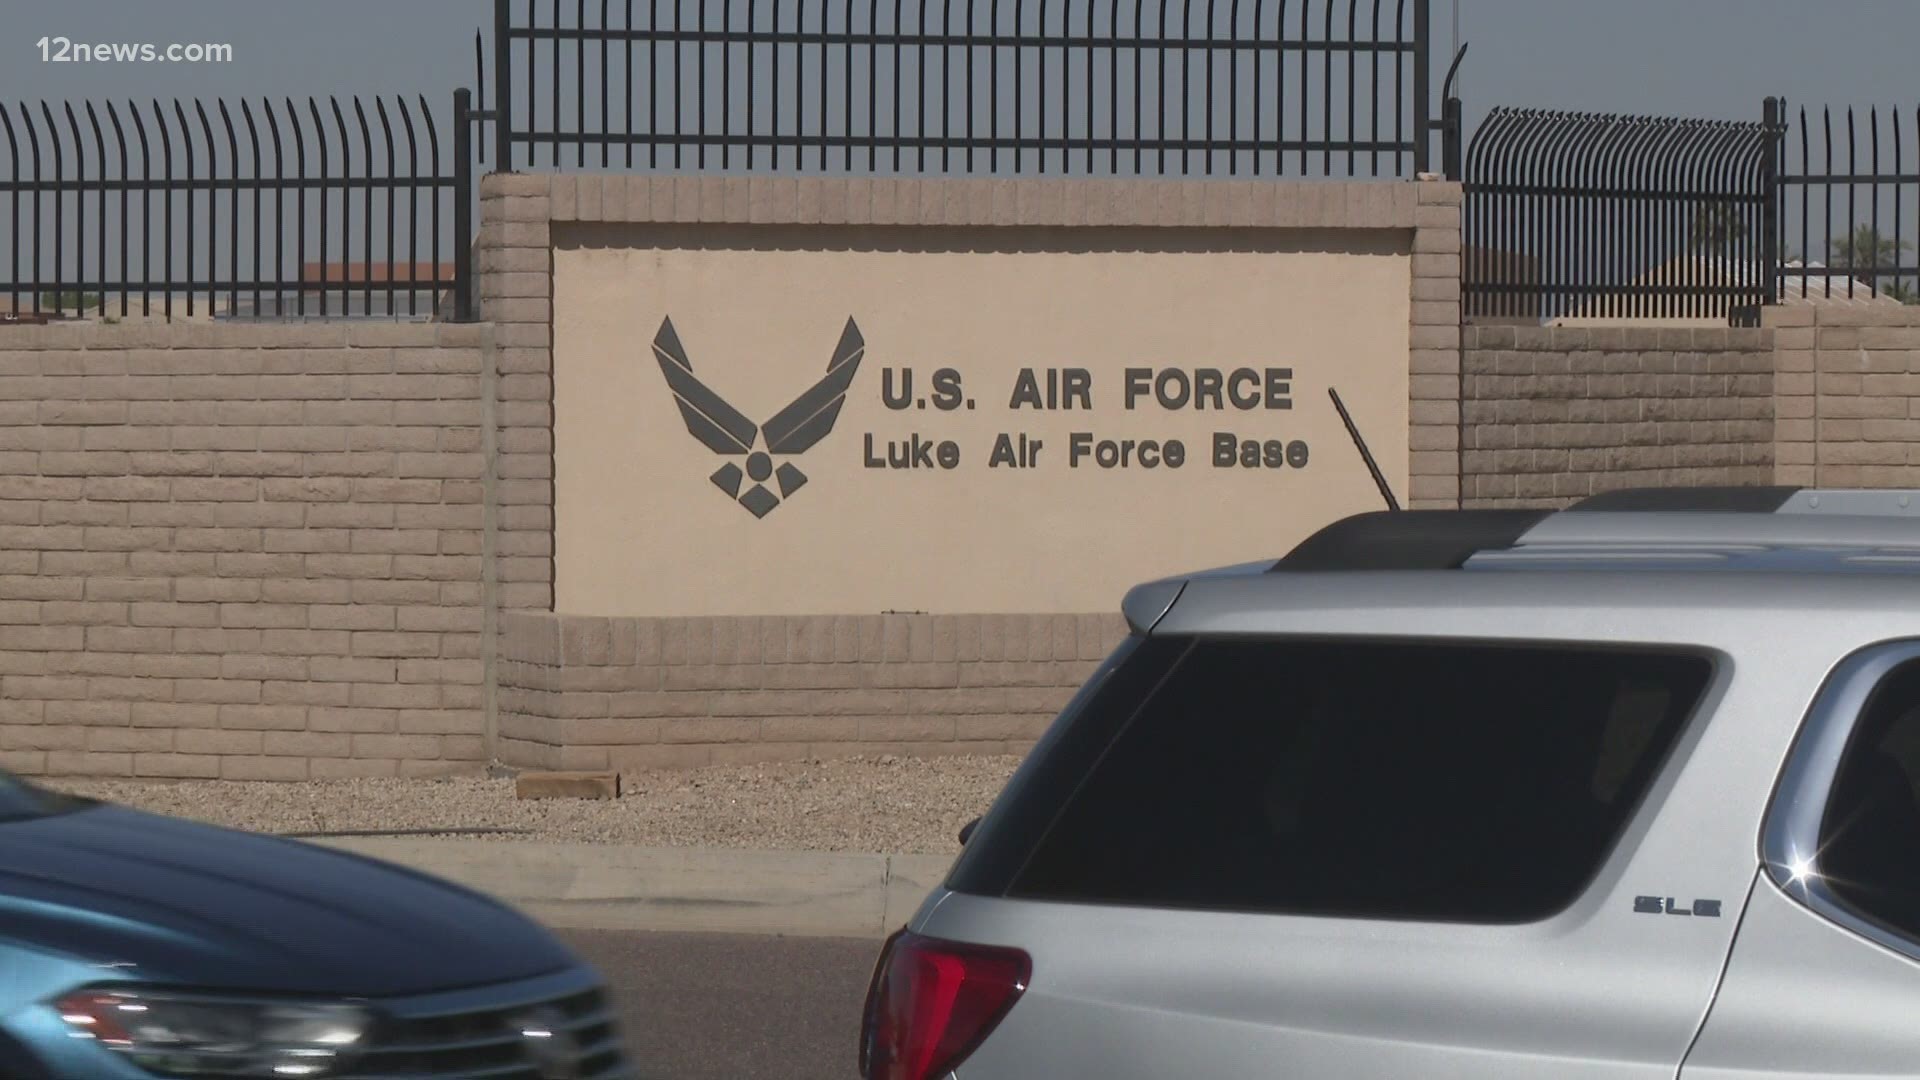 Law enforcement responded to a "real-world security incident" at Luke Air Force Base on Friday morning. Officials say there is no threat to the base or community.